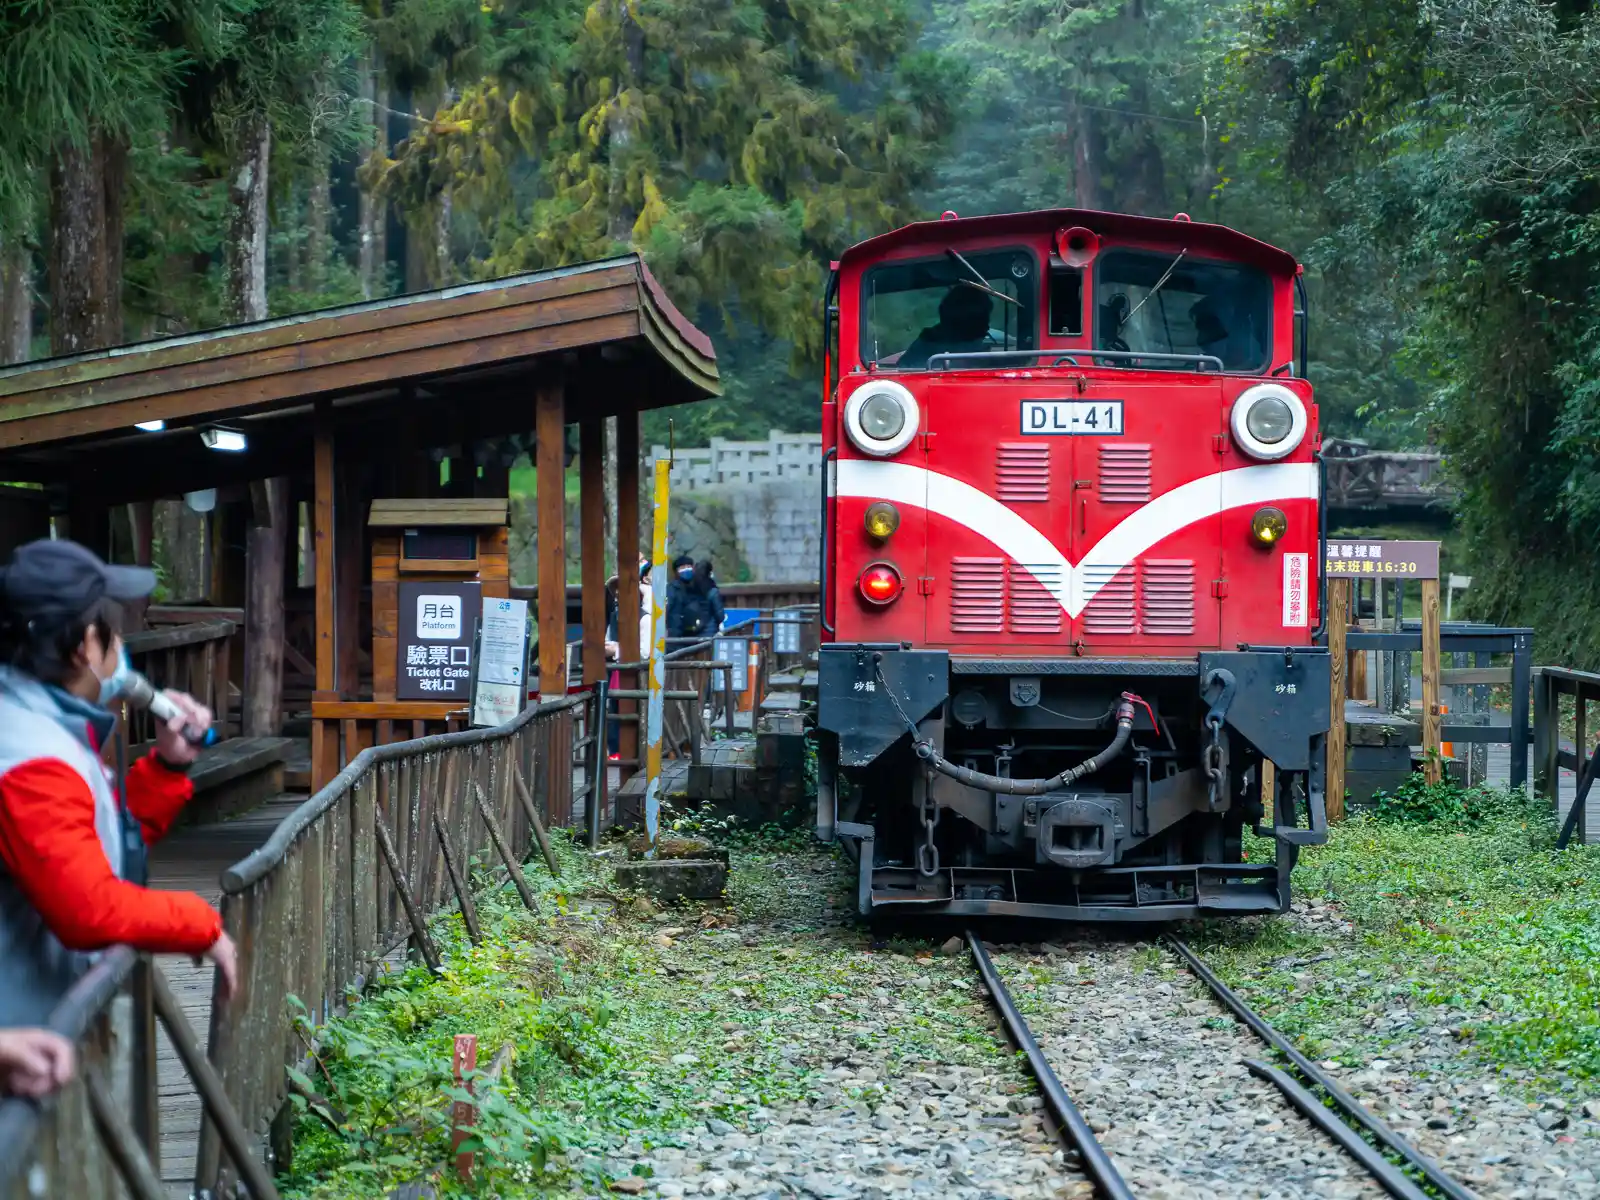 A train approaches one of the platforms along the Alishan Forest Railway.